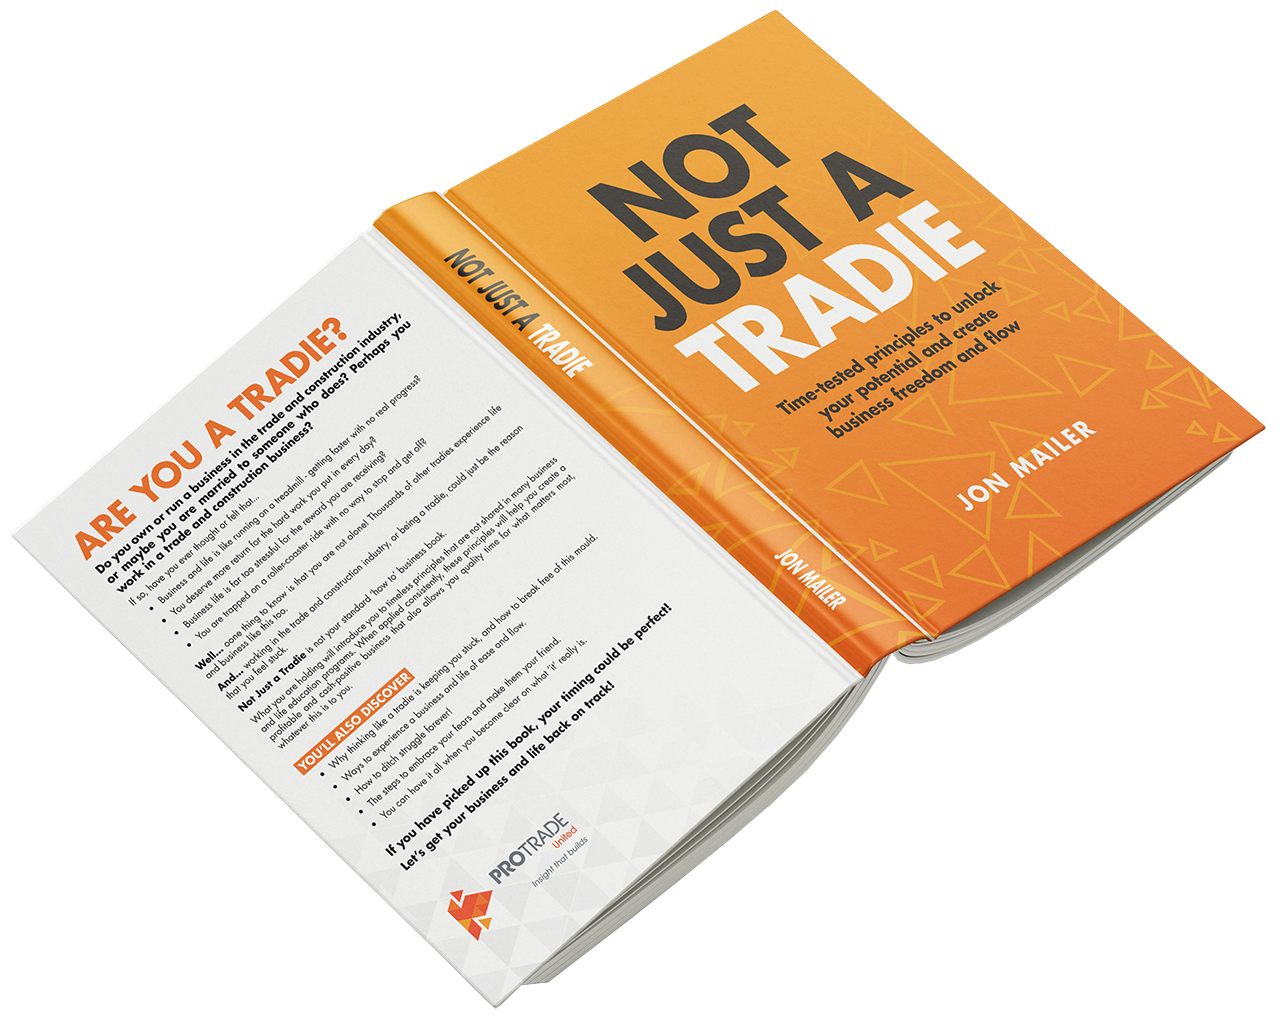 Not Just A Tradie Book by Jon Mailer